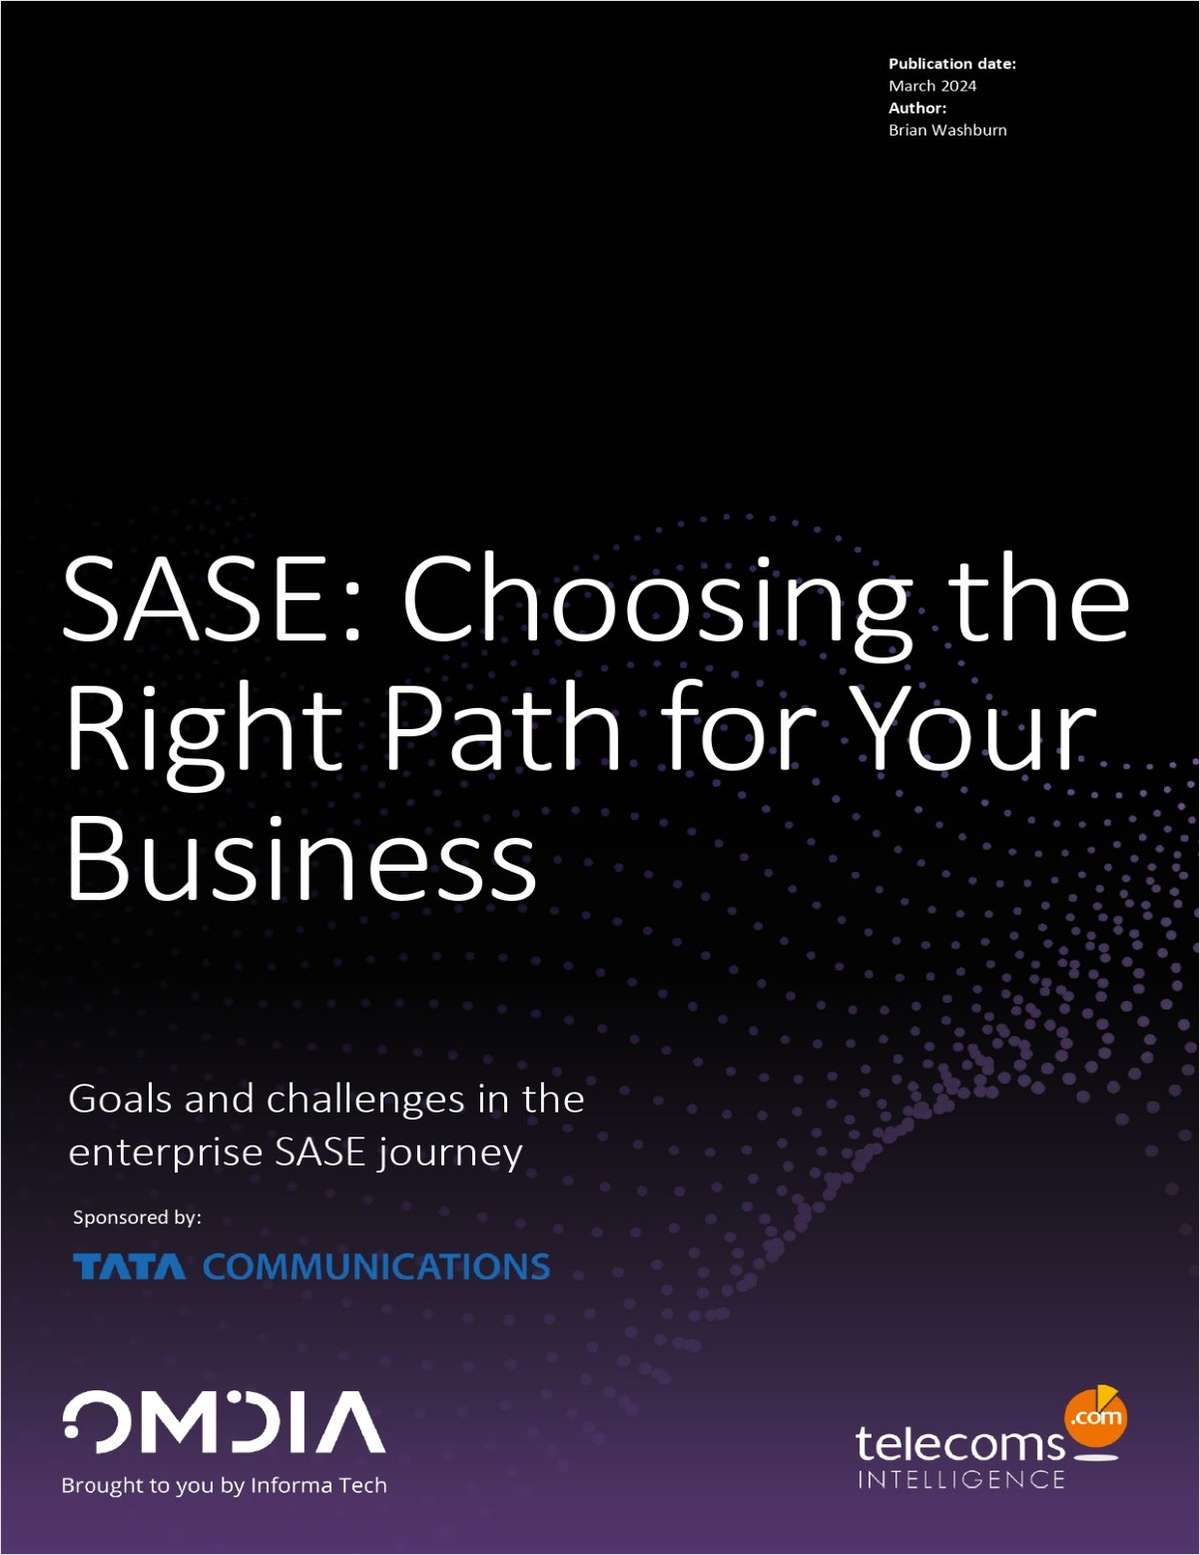 SASE: Choosing the Right Path for Your Business